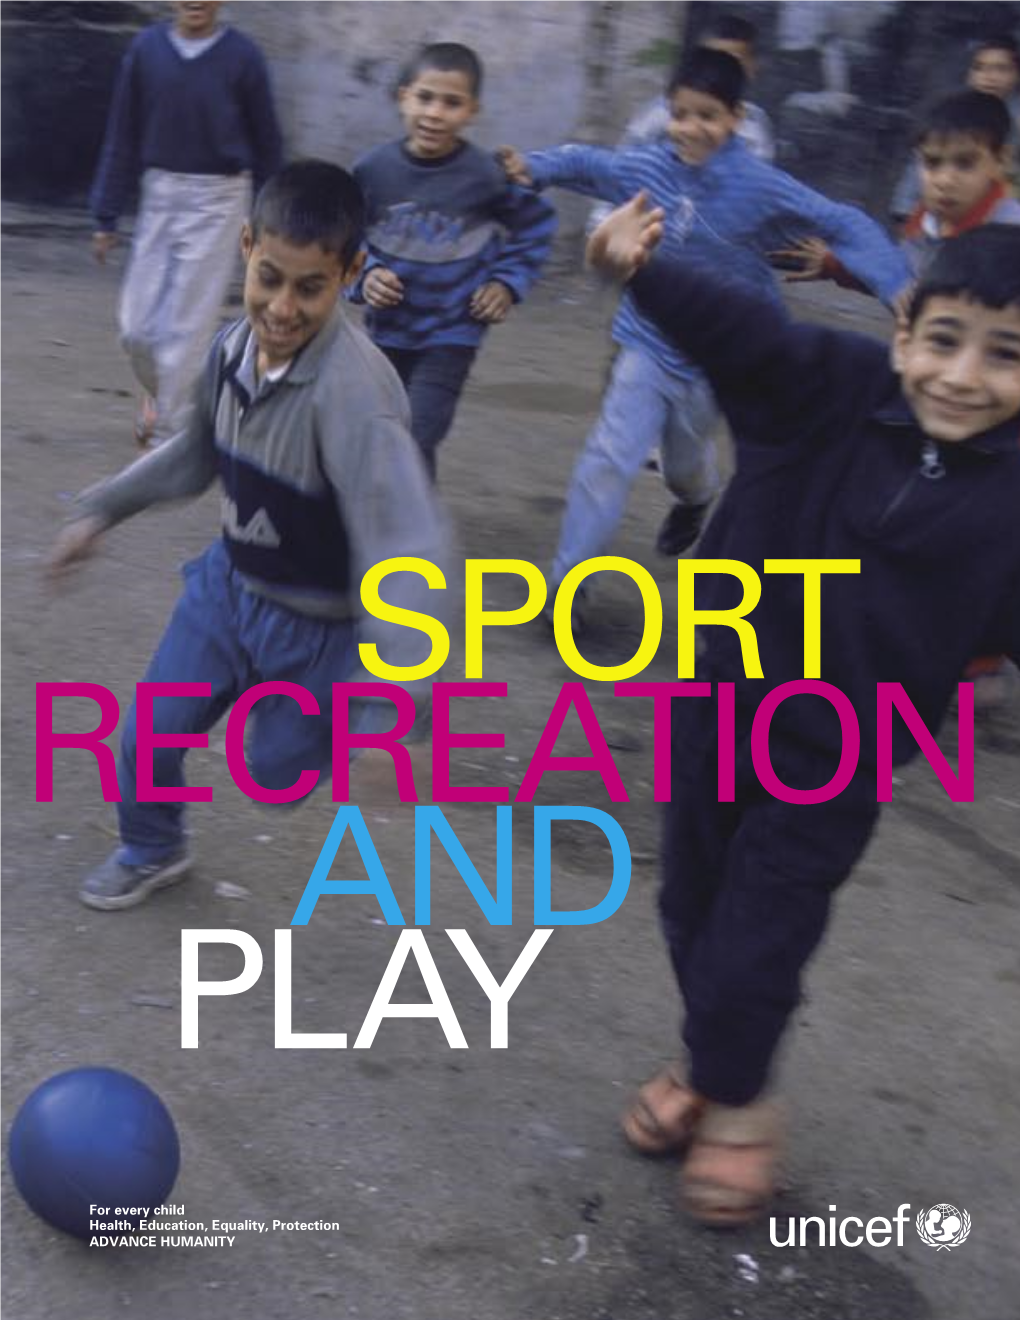 Sport, Recreation and Play Are Improving Health – Both Mind and Body